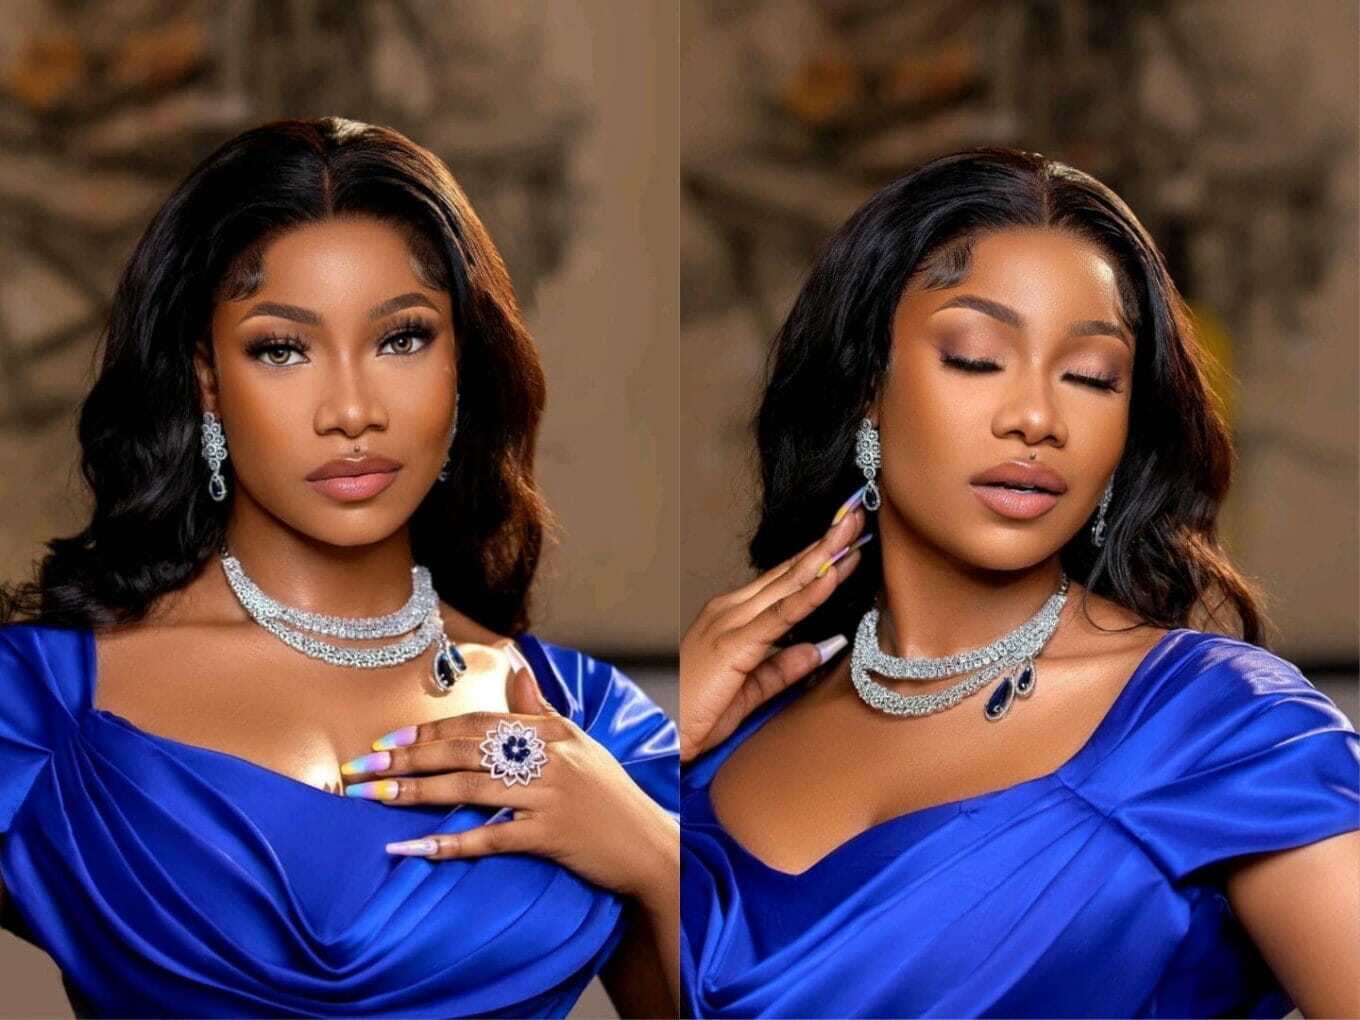 Don’t call me lucky, call me Badass’ – Tacha brags how she makes her money